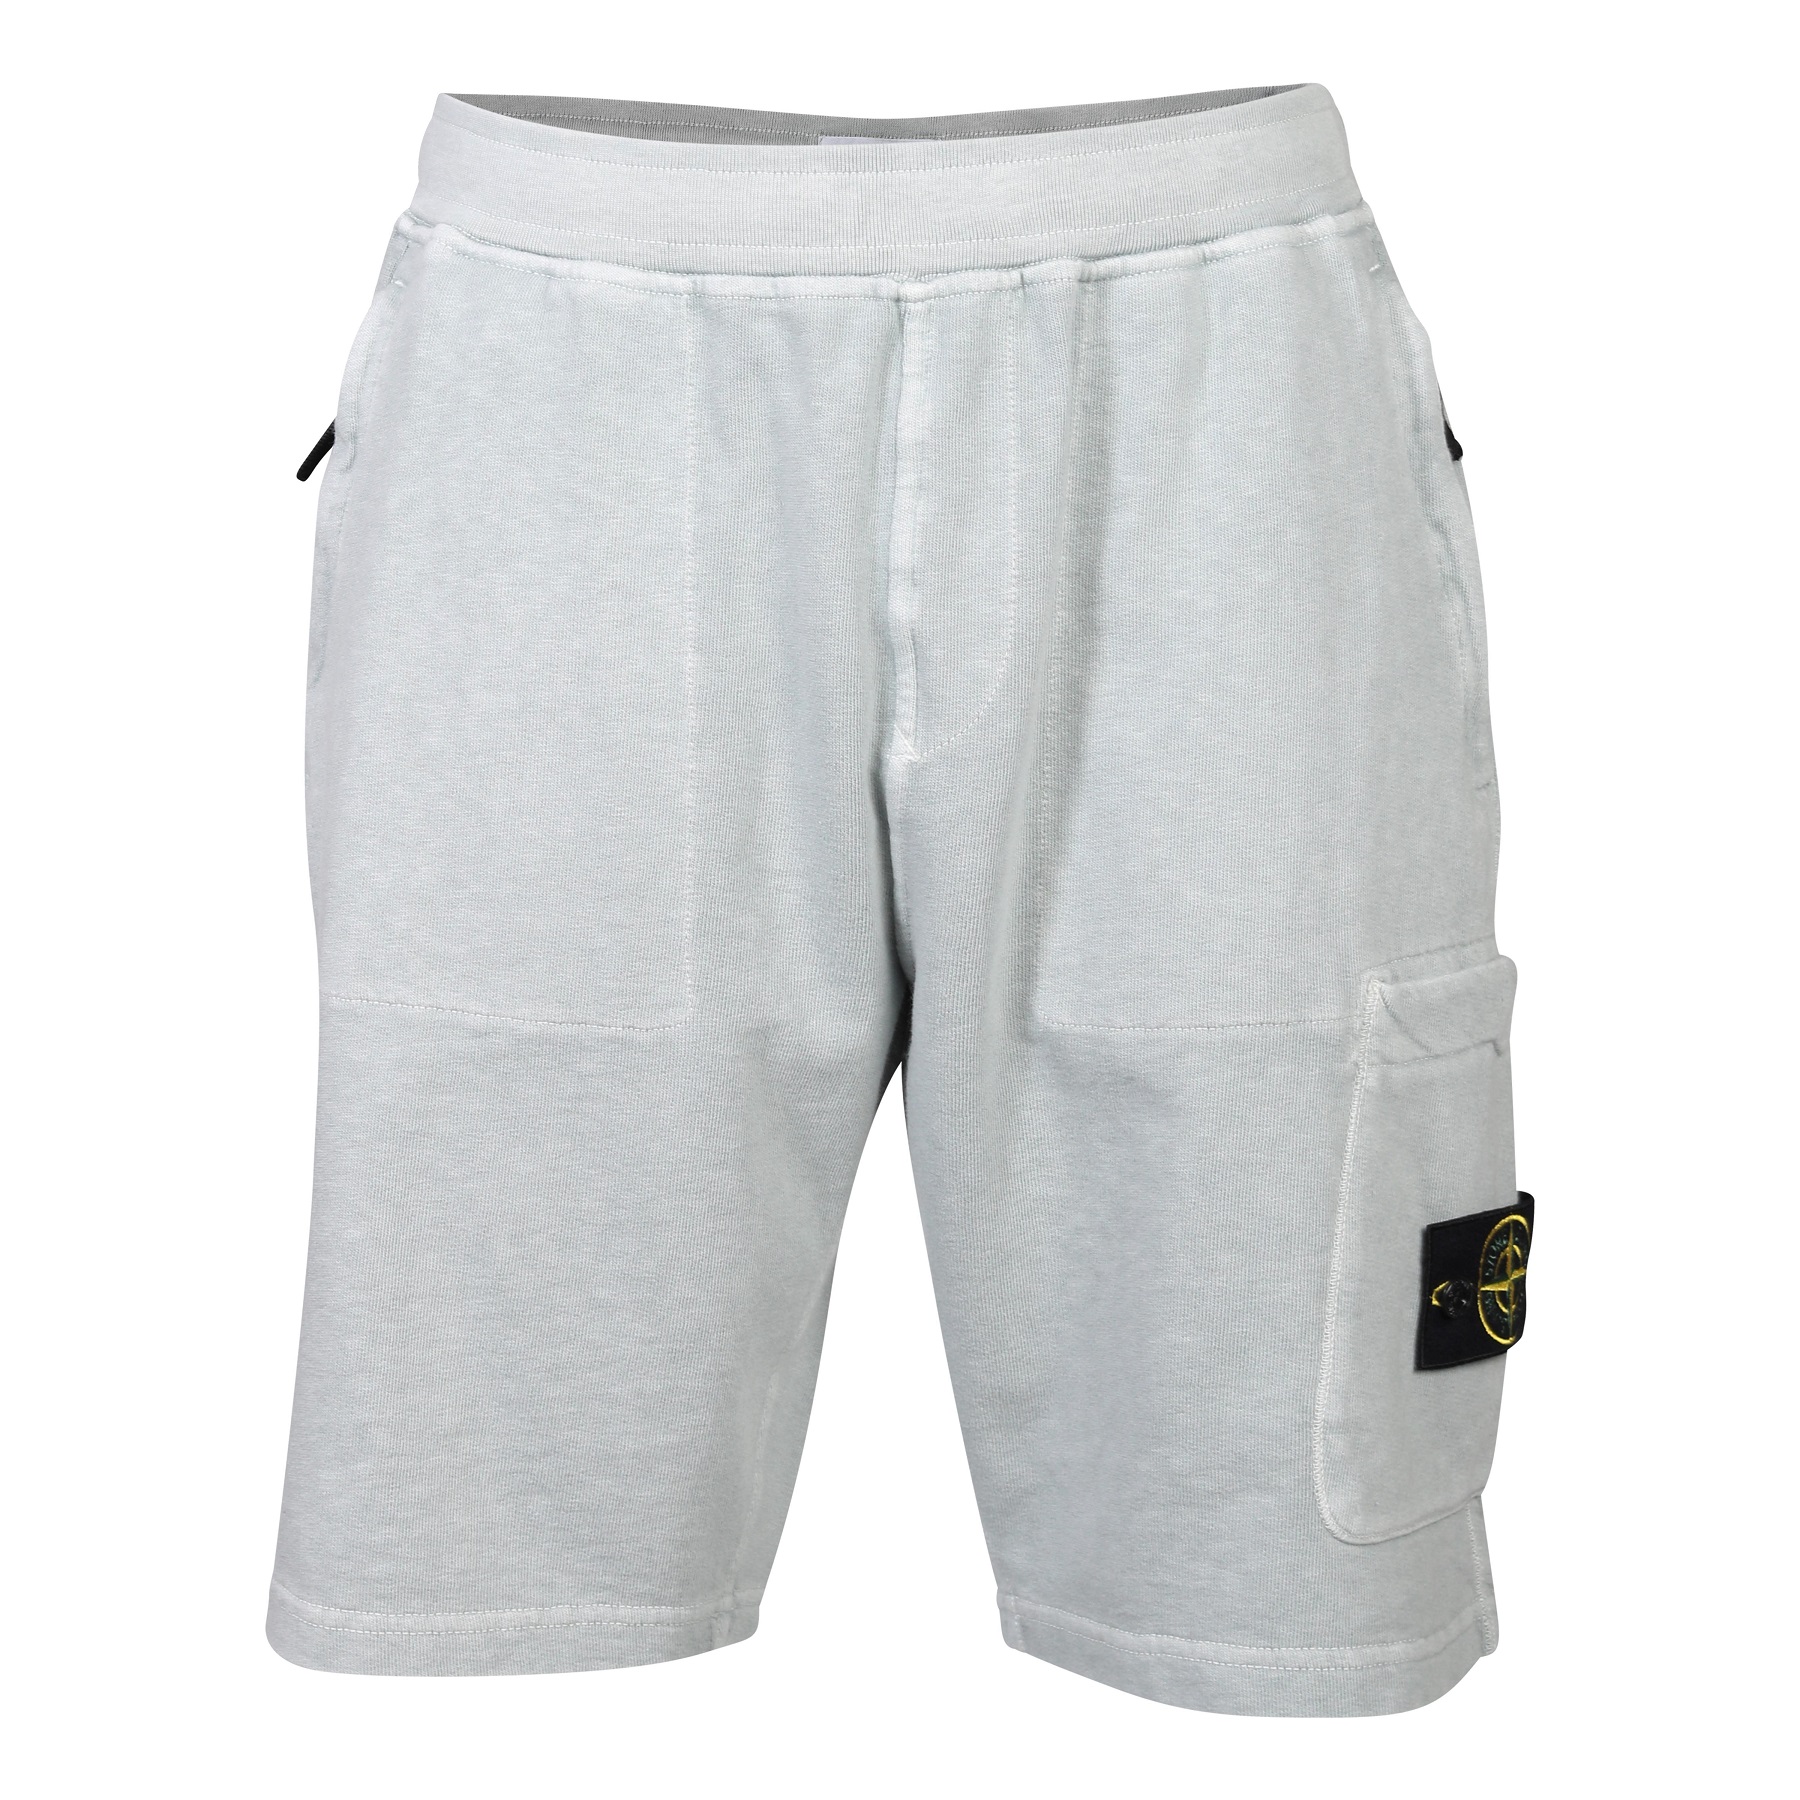 STONE ISLAND Light Sweat Short in Washed Sky Blue S